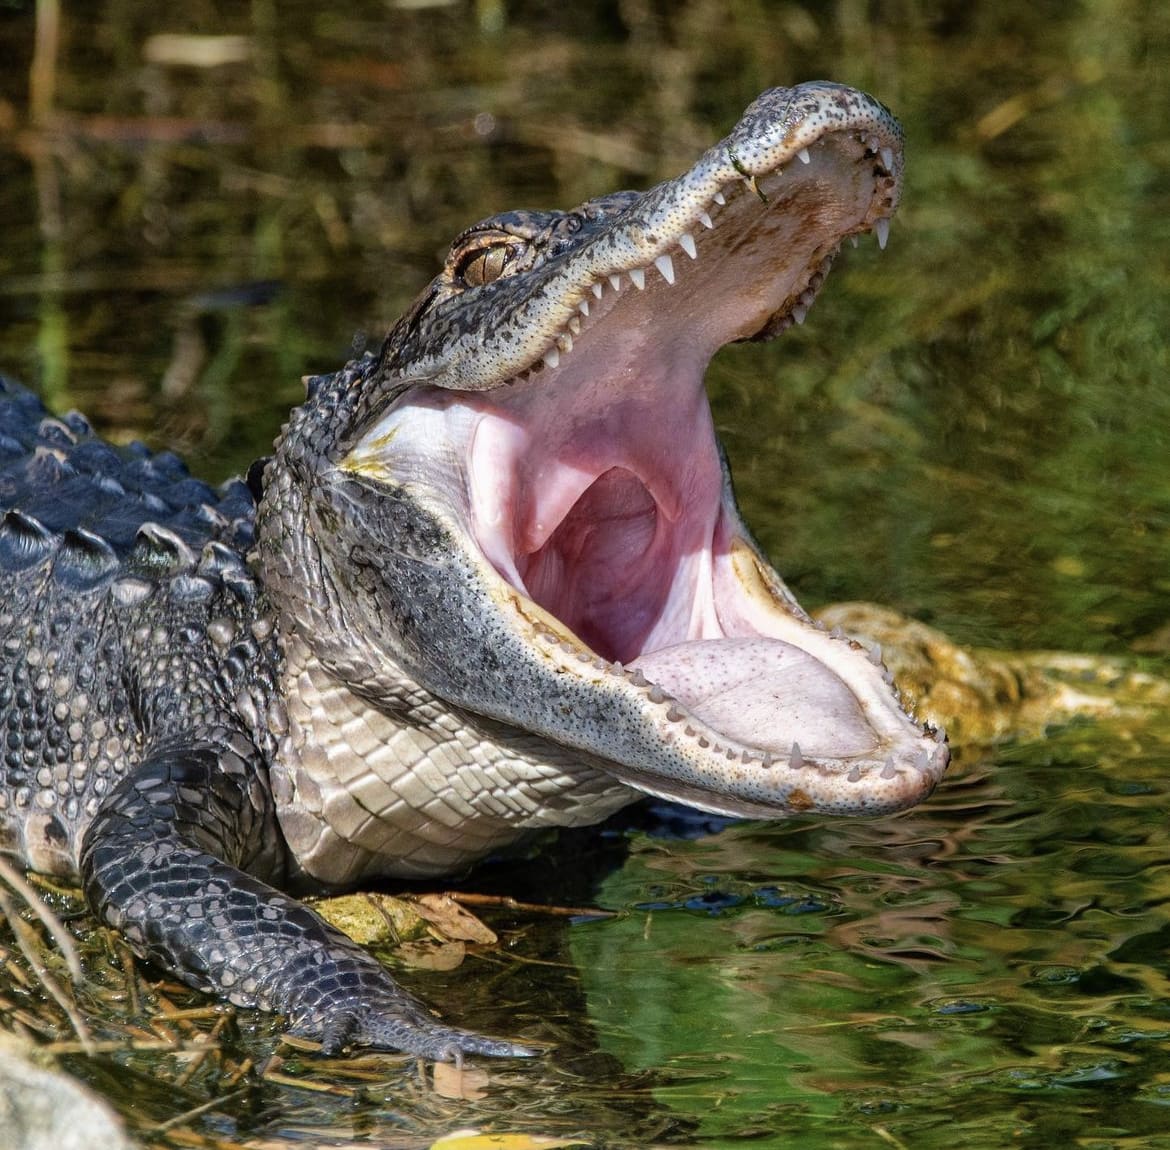 American Alligator sunning itself with an open mouth